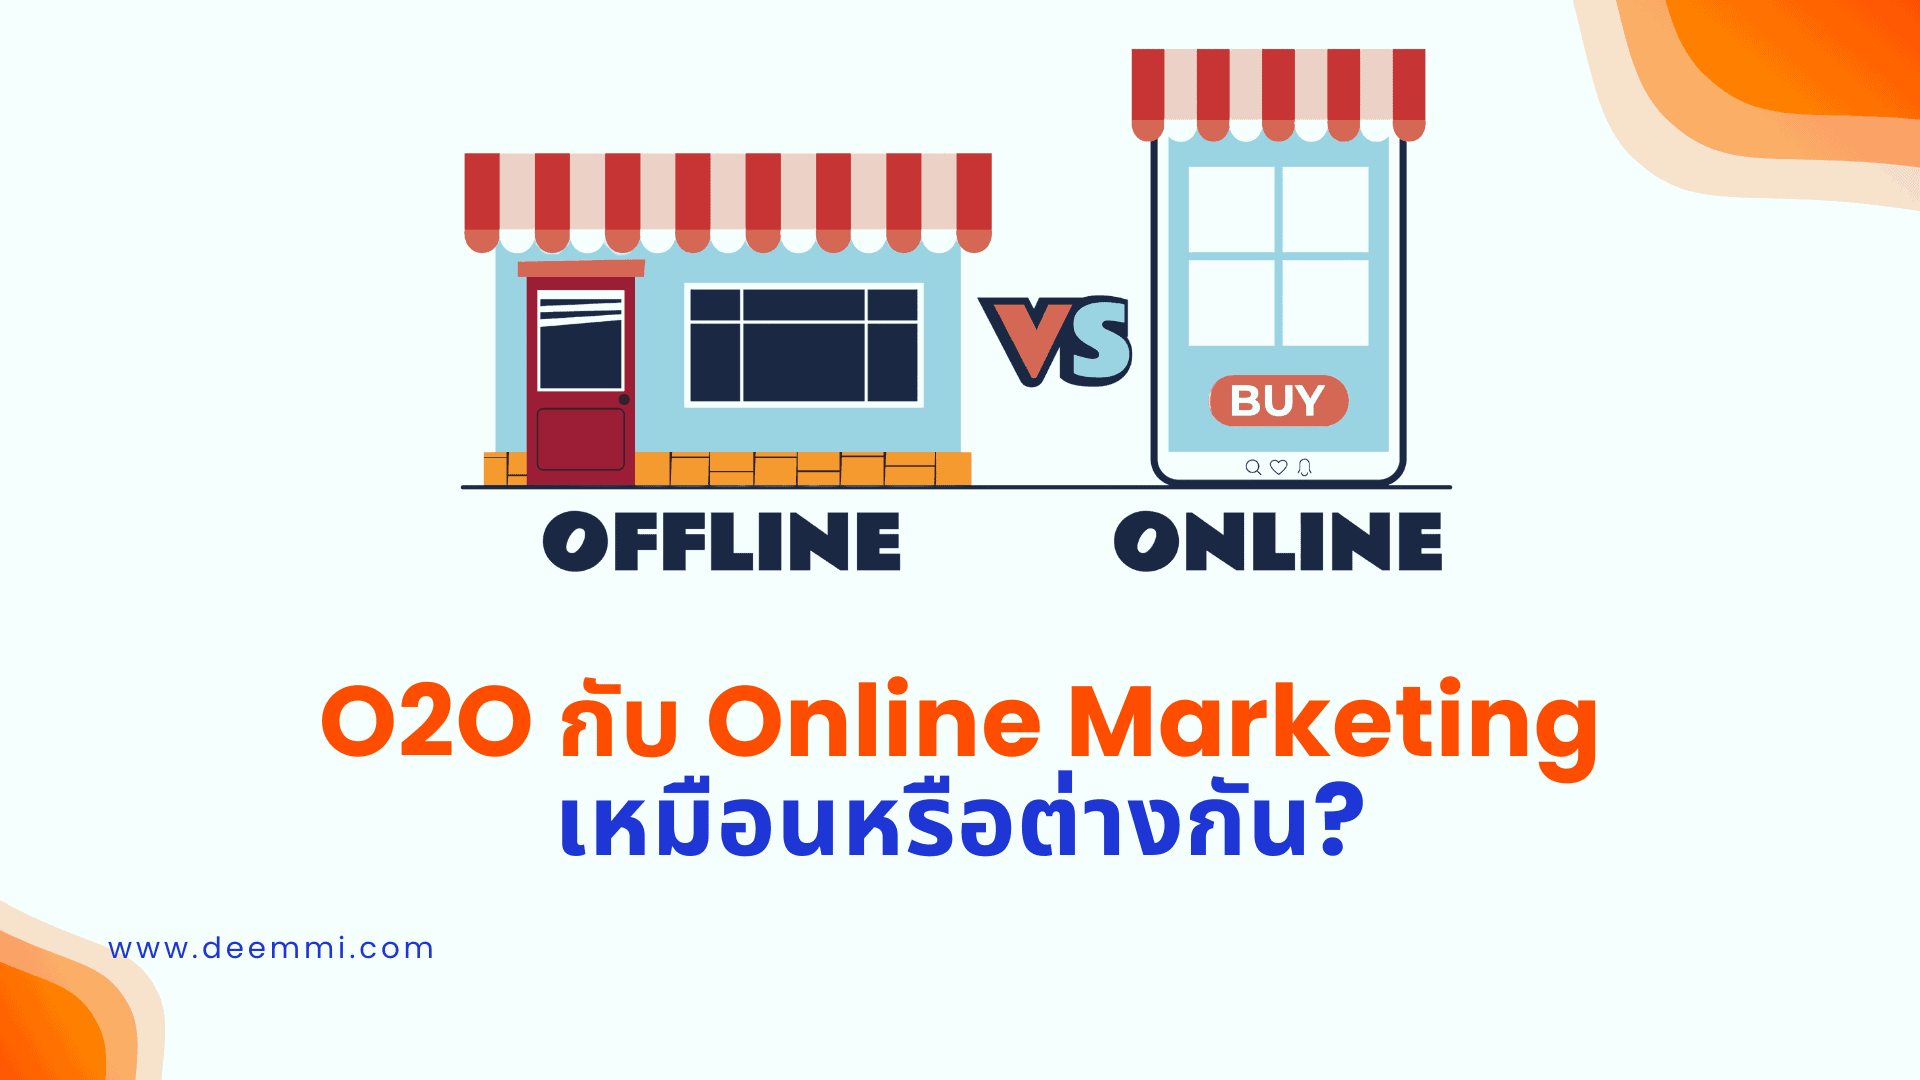 O2O กับ Online Marketing เหมือนหรือต่างกัน (What is the difference between O2O and online marketing)